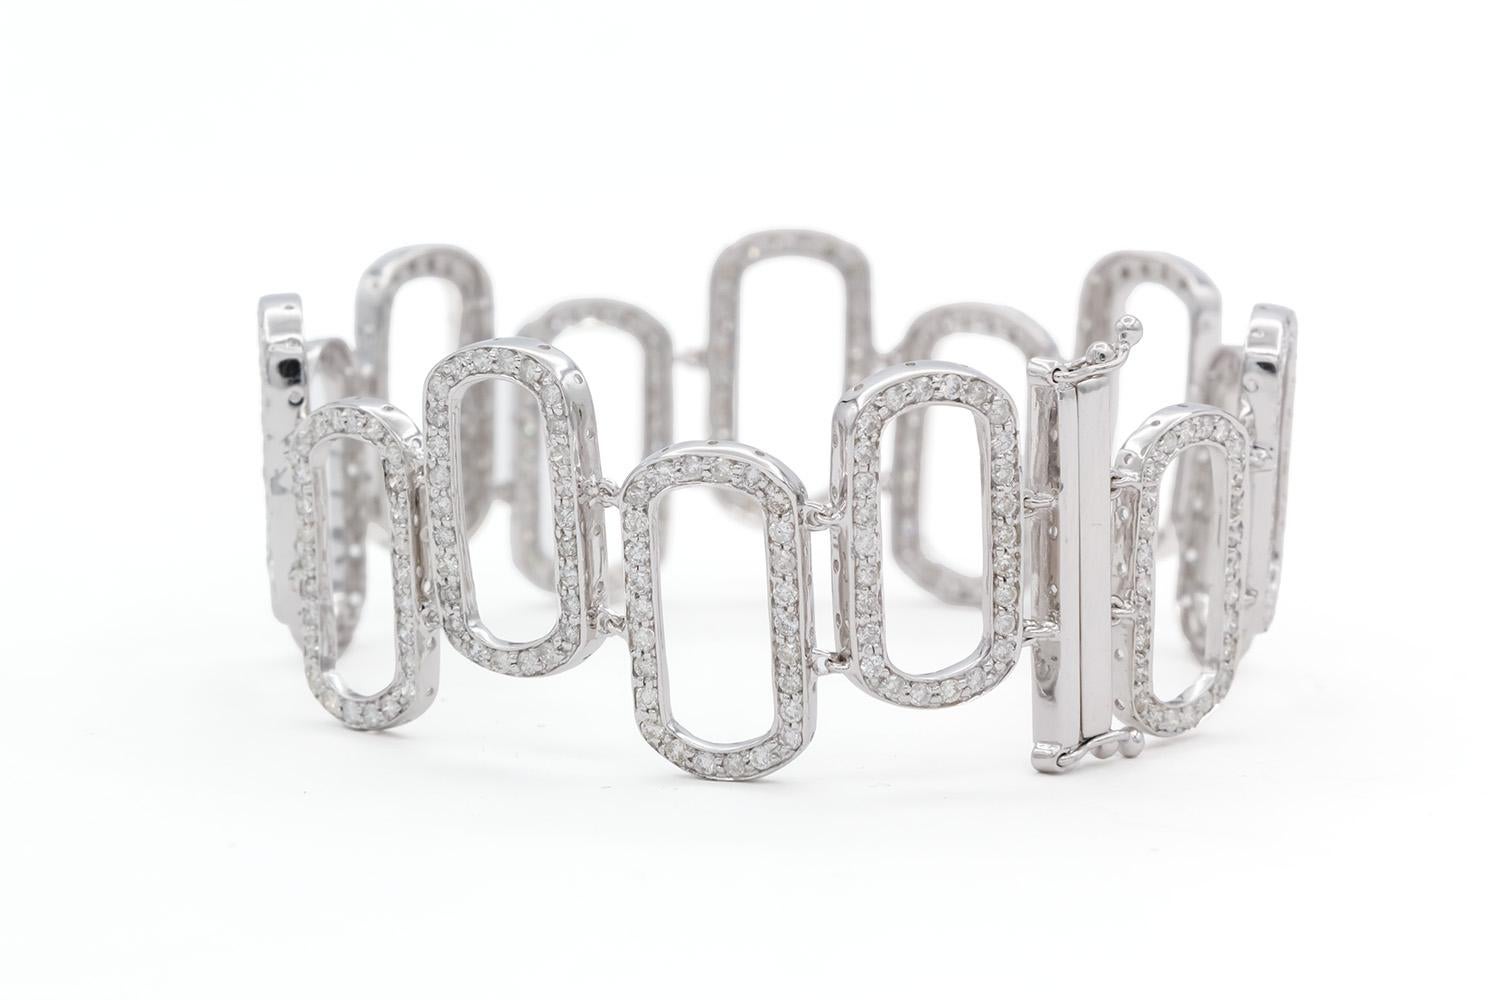 18k White Gold & Diamond Oval Link Bracelet 4.20ctw G-H/VS2-SI1 In Excellent Condition For Sale In Tustin, CA